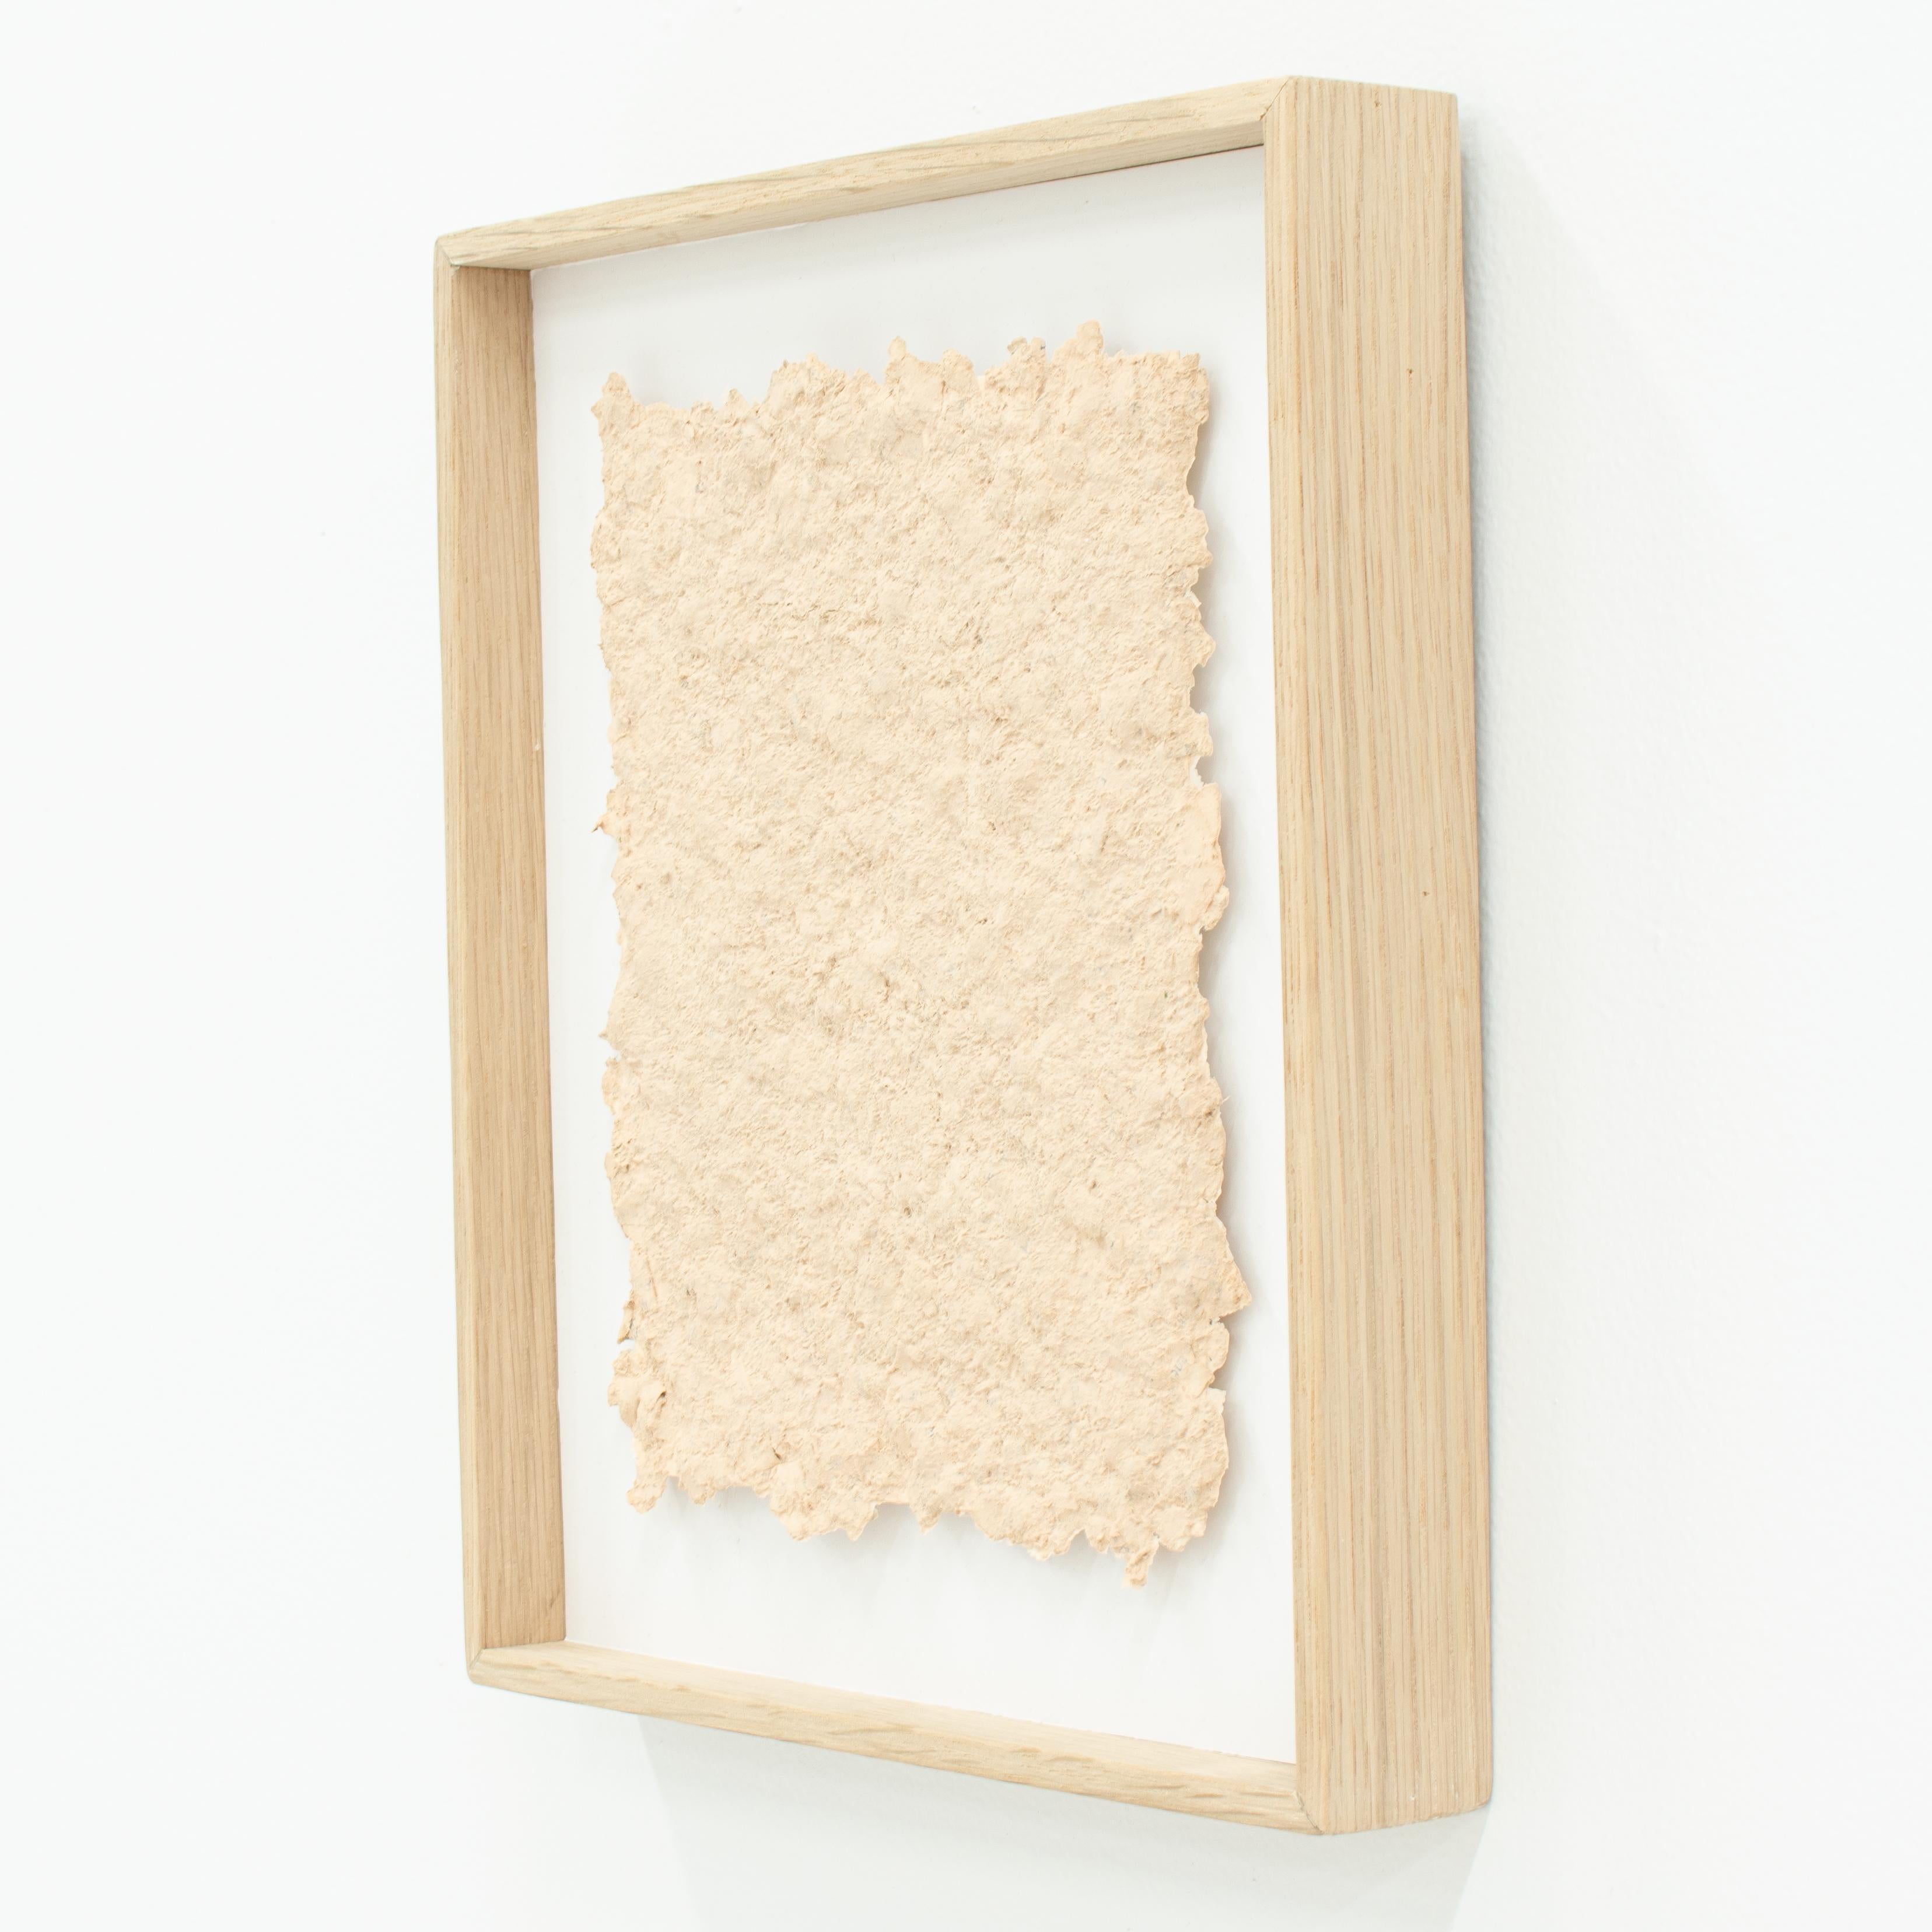 P 300 Series, Blush - textured book pages & pigment in open oak wood frame  - Minimalist Mixed Media Art by Austin Kerr